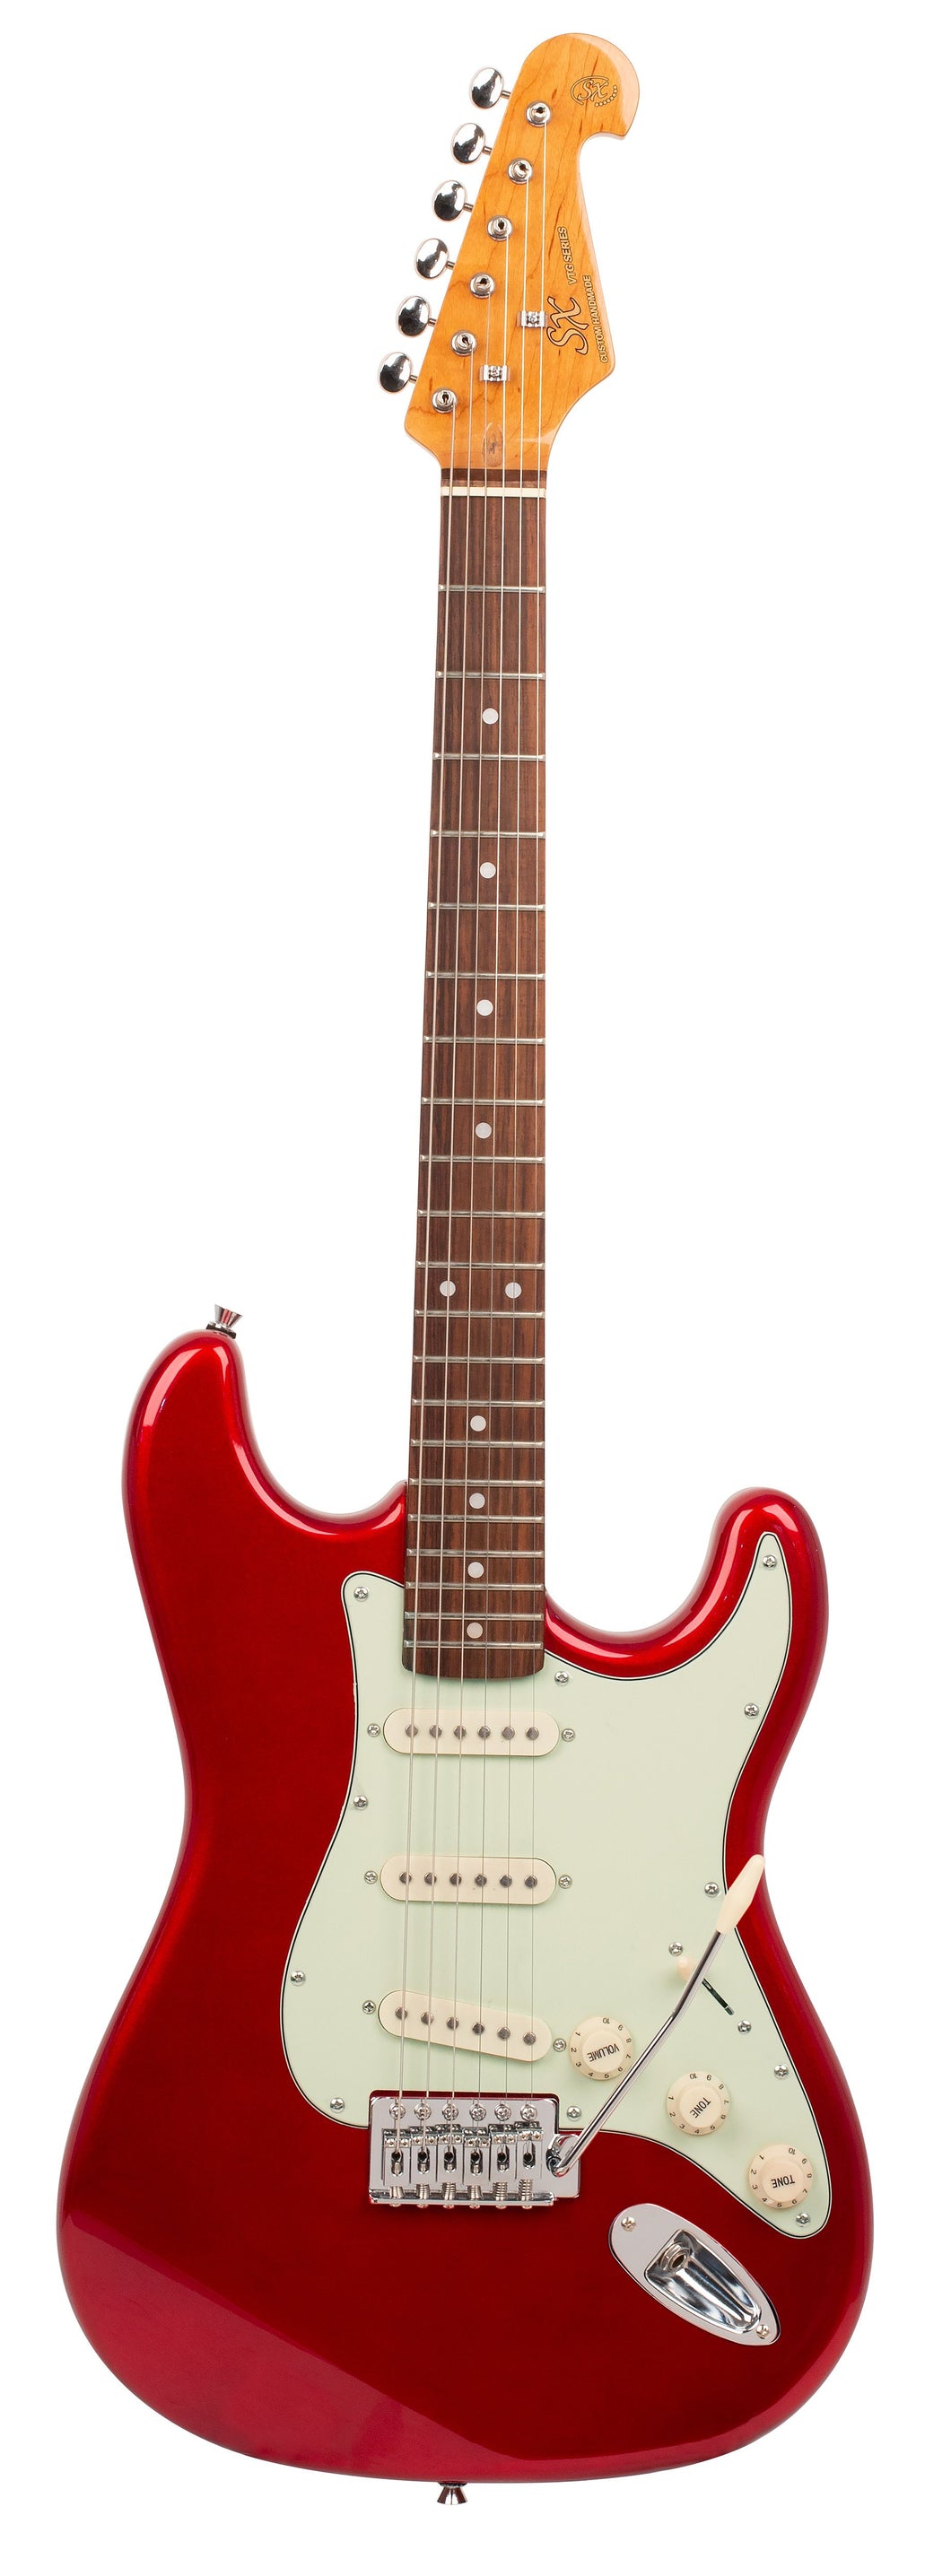 SX Electric guitar - Candy Apple Red